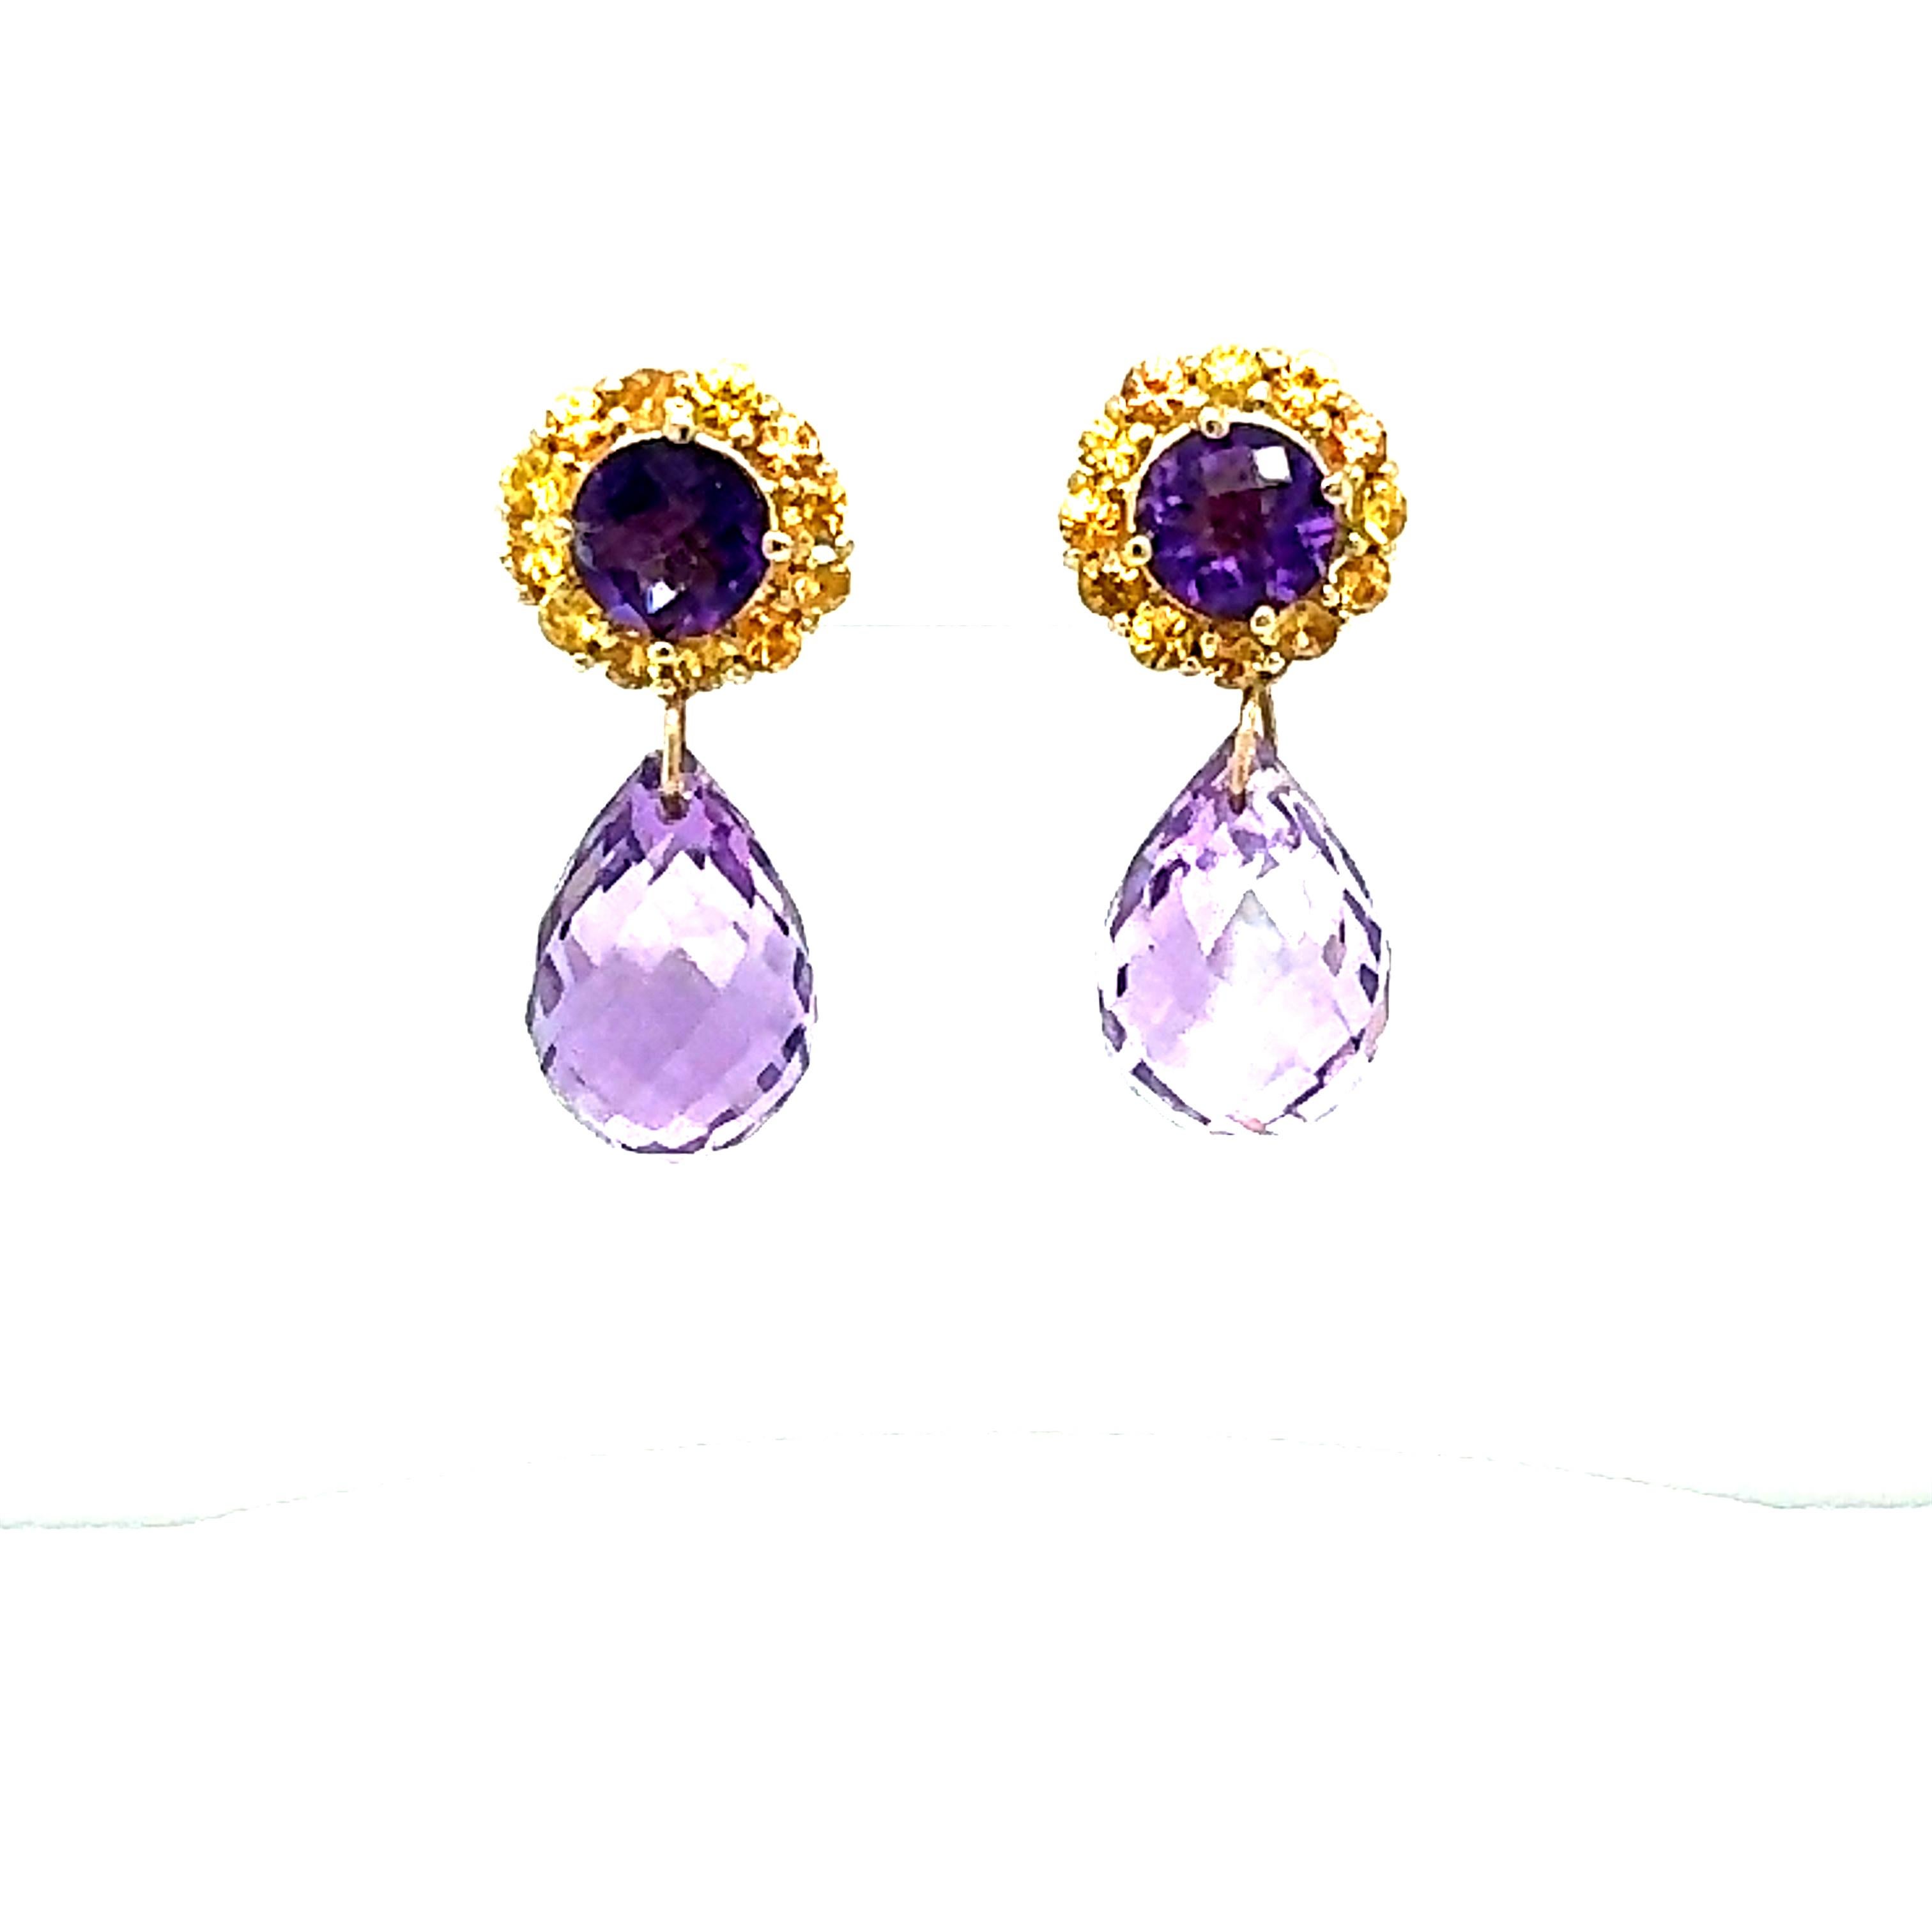 15.85 Carat Amethyst Sapphire Yellow Gold Drop Earrings

Item Specs:

2 Faceted Briolette Amethysts stones weighing approximately 13.34 carats
(Measurements of Amethyst Faceted Briolette 15mm x 12mm) 
2 Round Cut Amethysts weighing 1.48 carats
24